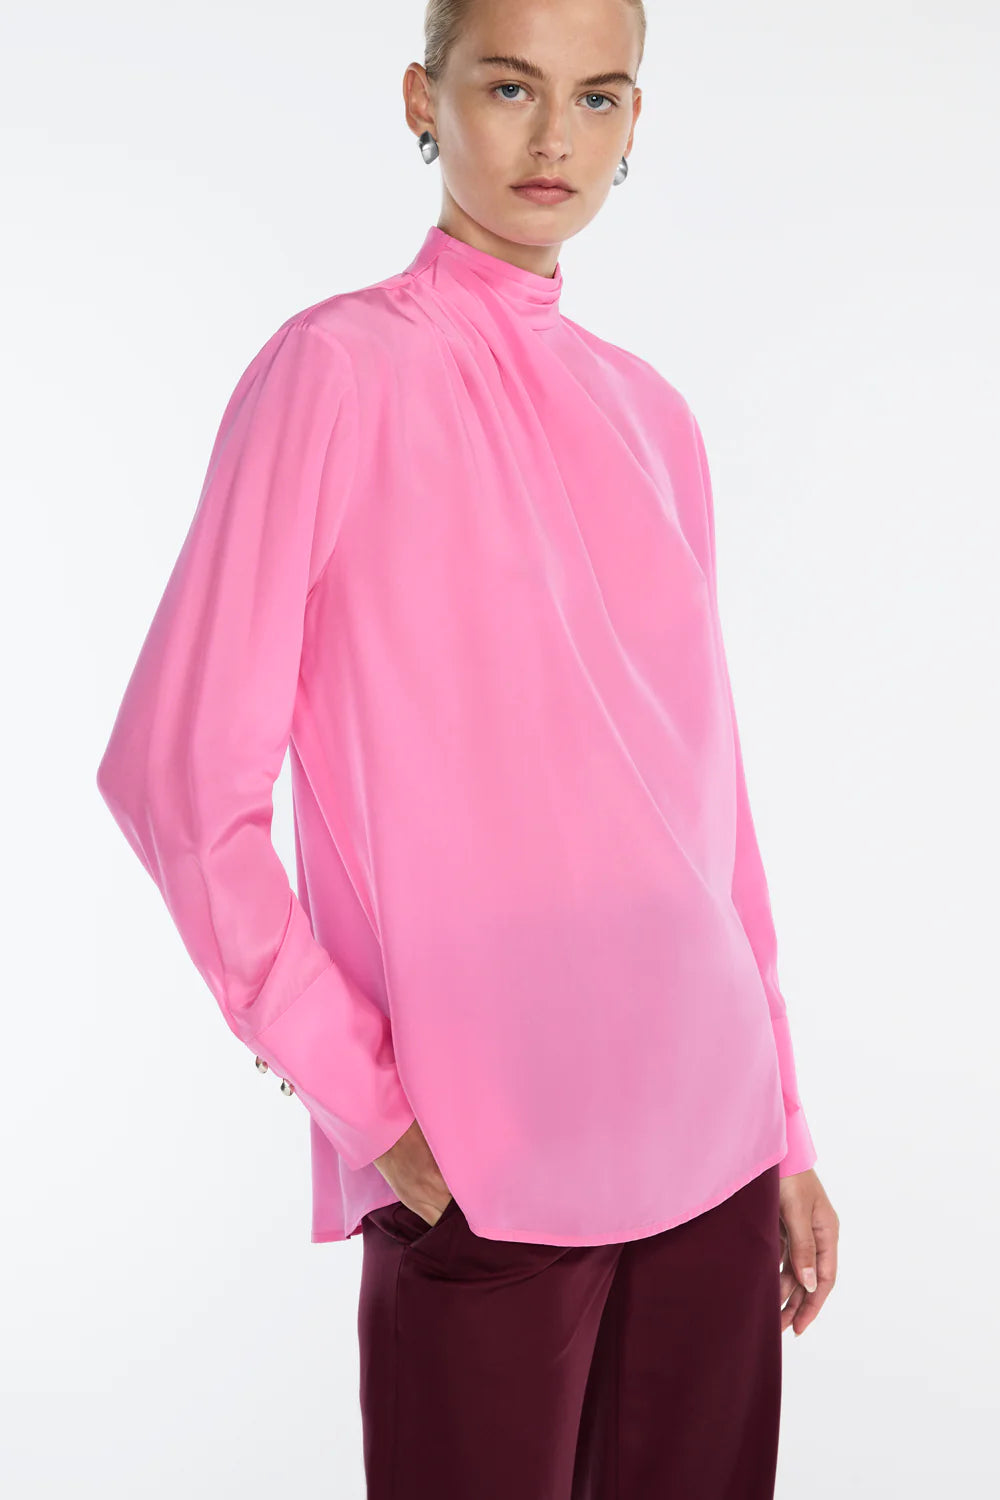 STAR POWER TOP - PINK